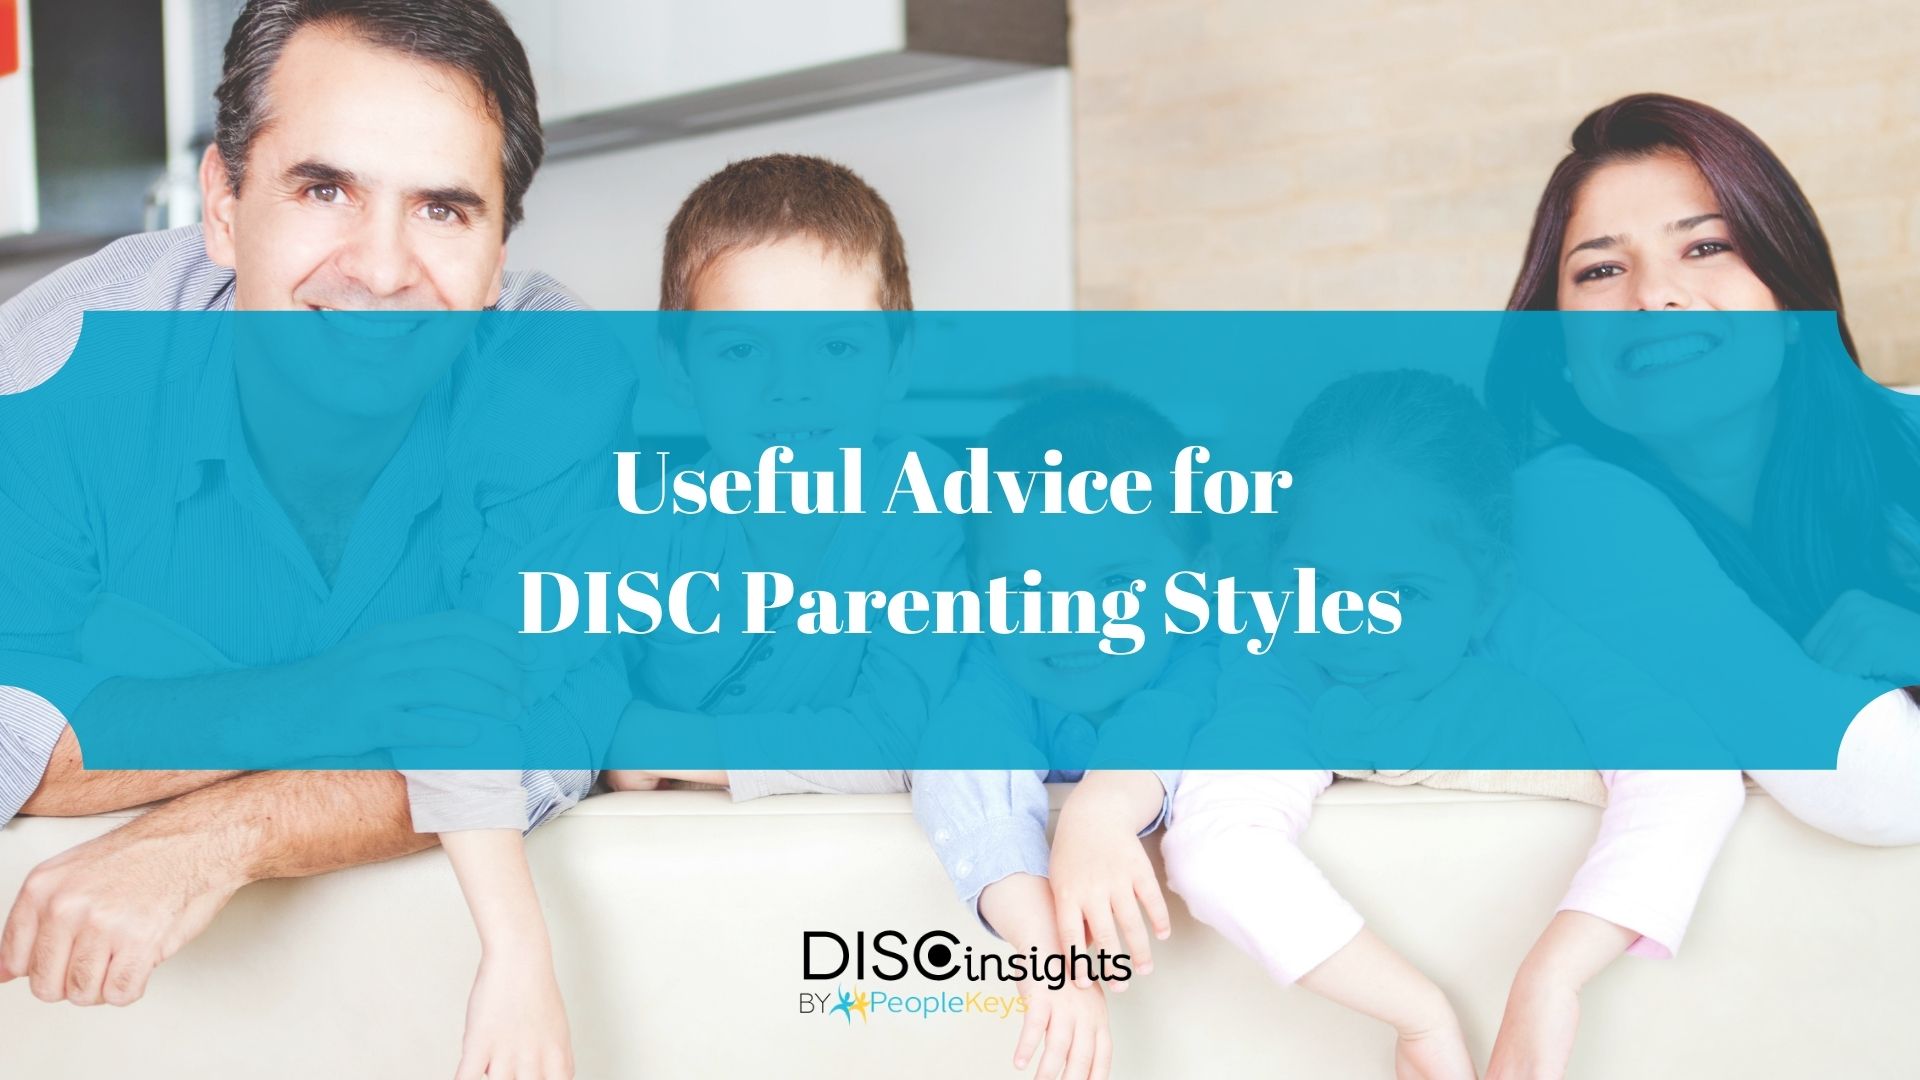 Useful Advice for DISC Parenting Styles